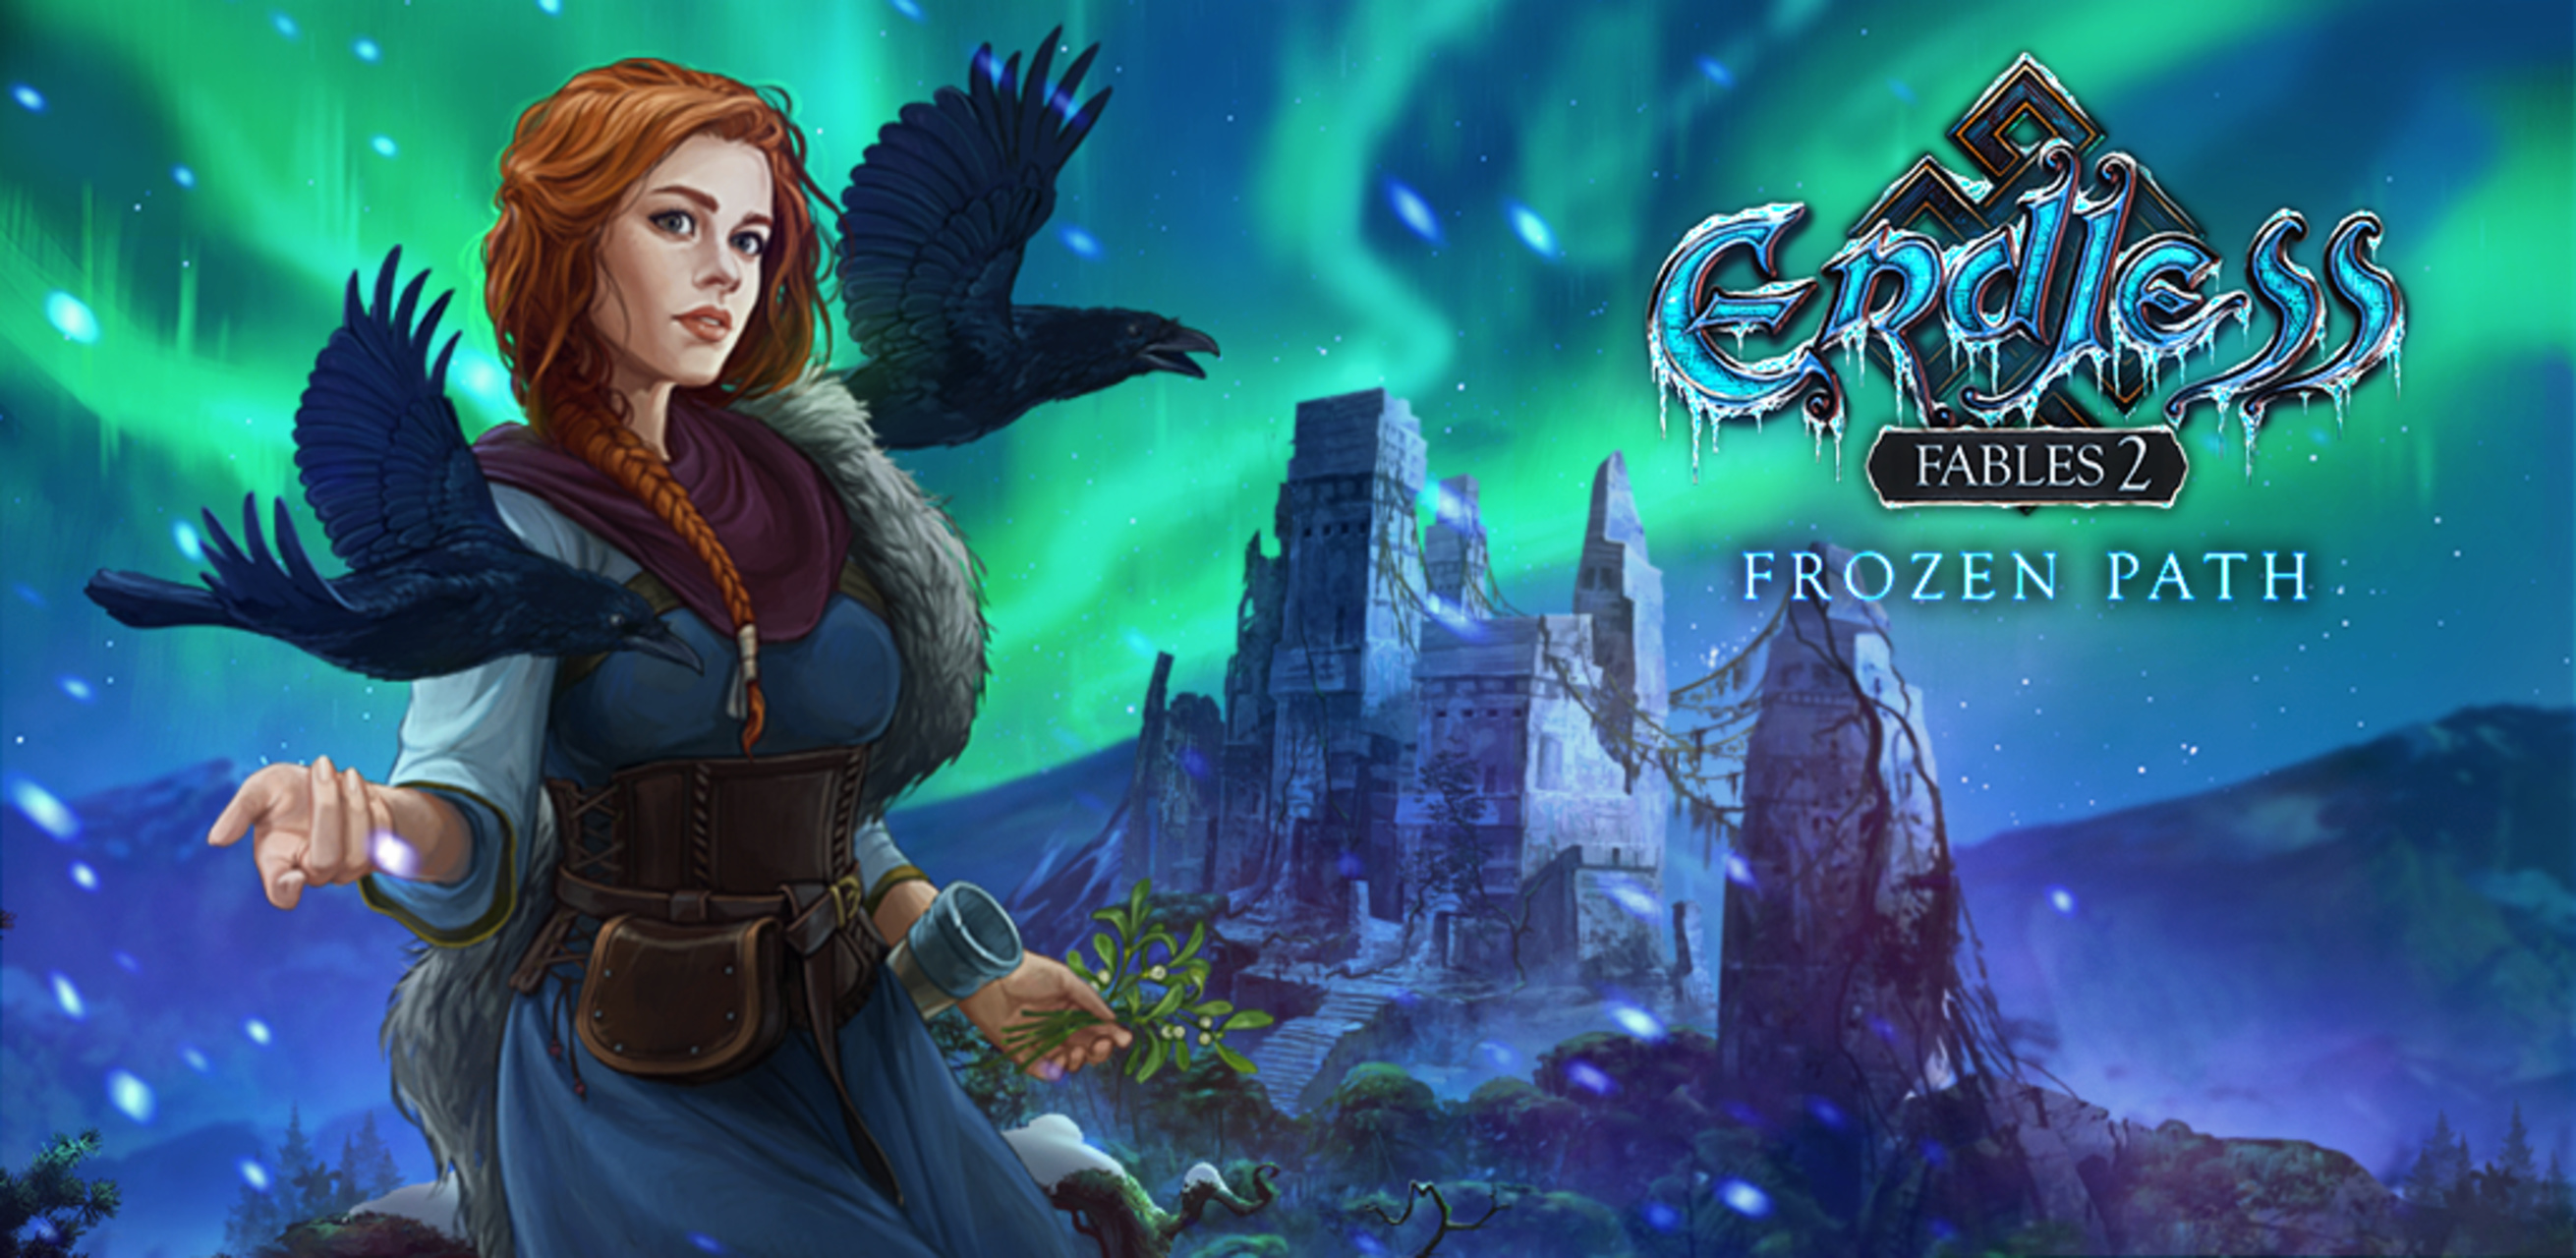 instal the last version for windows Endless Fables 2: Frozen Path